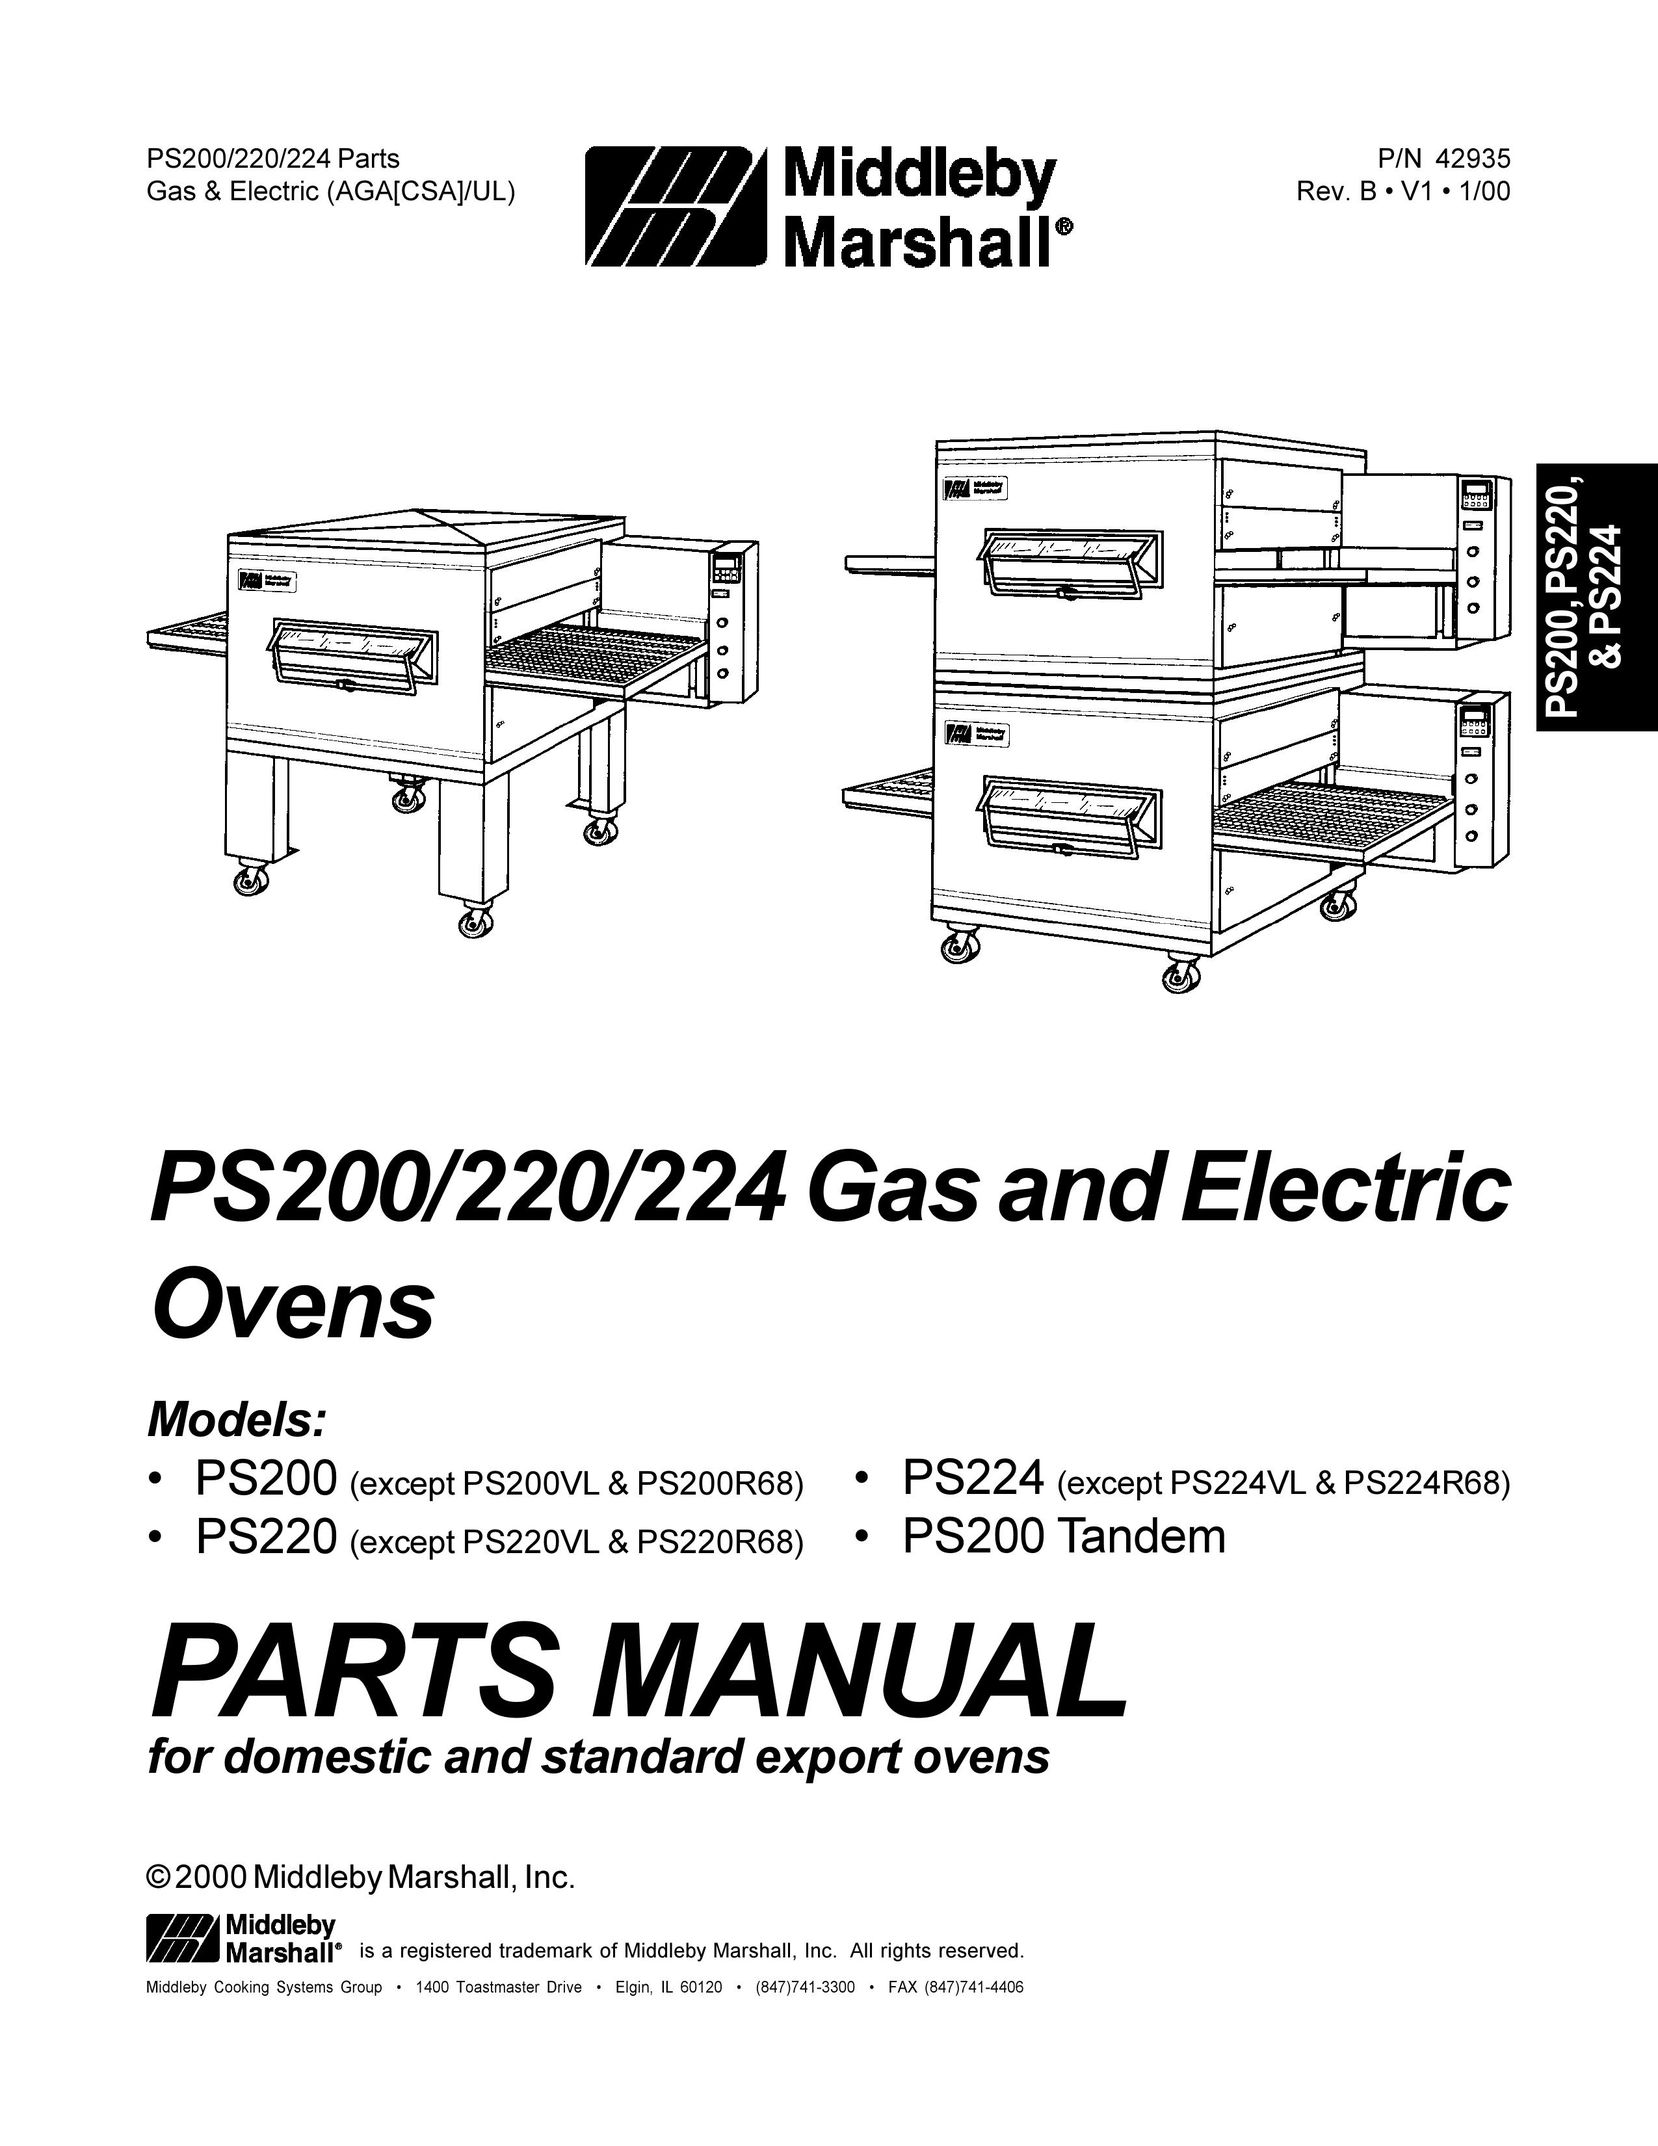 Middleby Marshall PS200 Tandem Oven User Manual